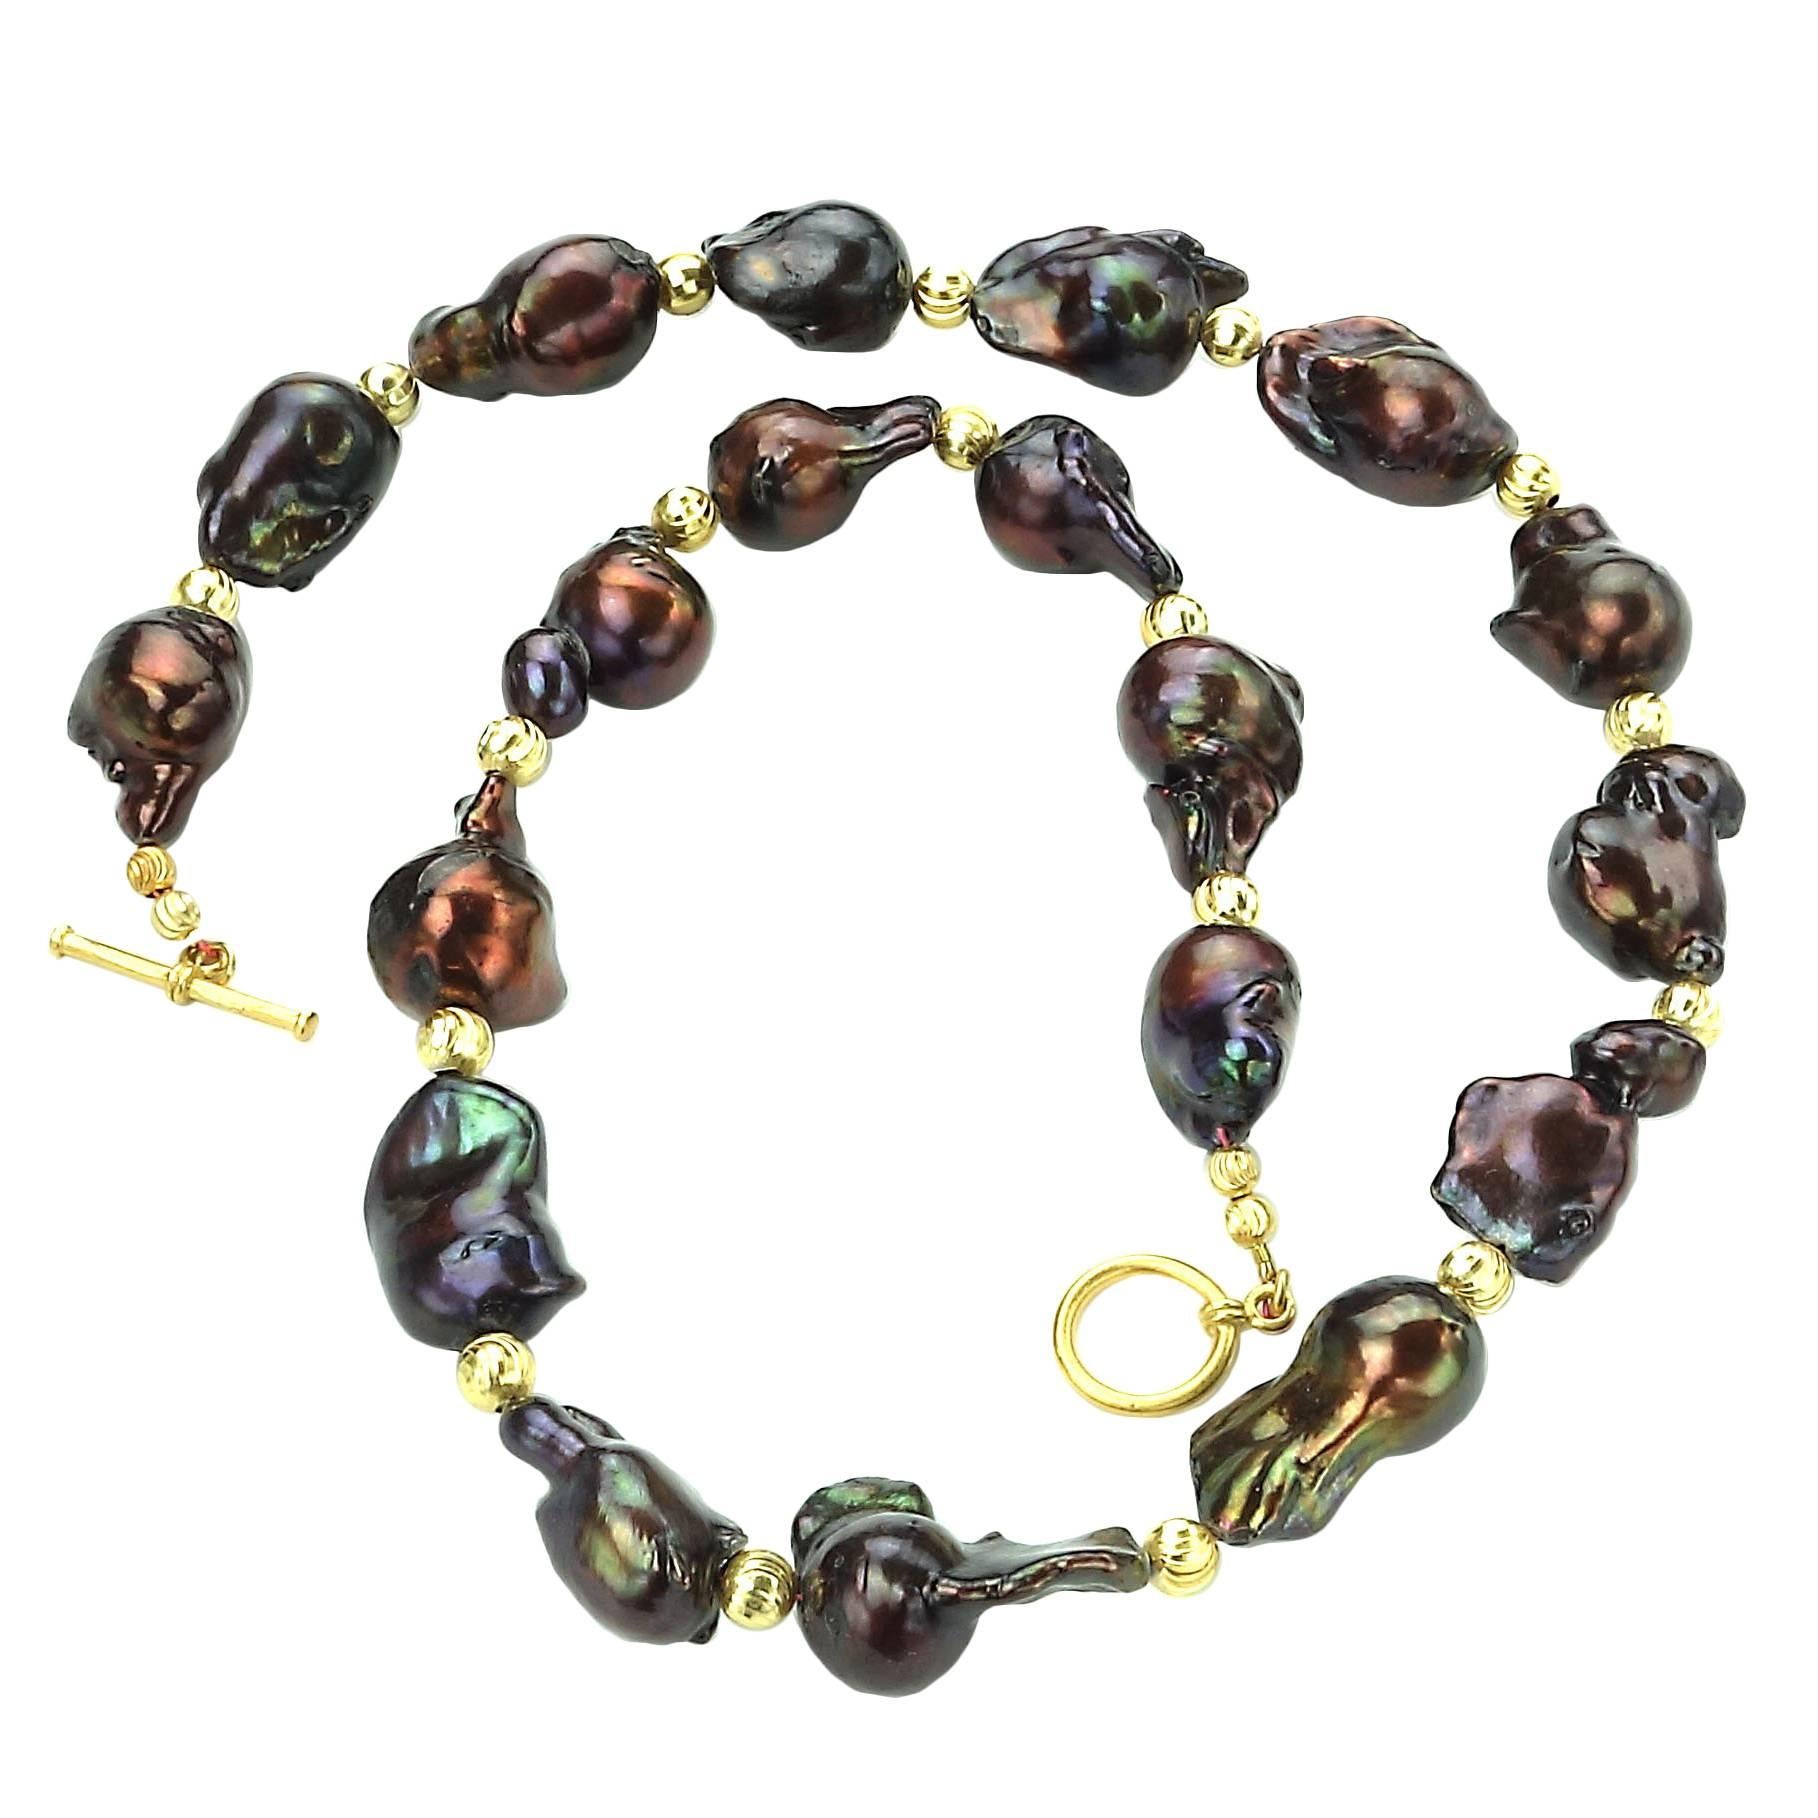 Baroque Pearl Necklace in wonderful shades of iridescent deep wine/brown with flashes of green and pinky-red. These funky, freeform Pearls are a joy to wear.  Etched gold tone spacers accent them and they are secured with a gold tone toggle.  The